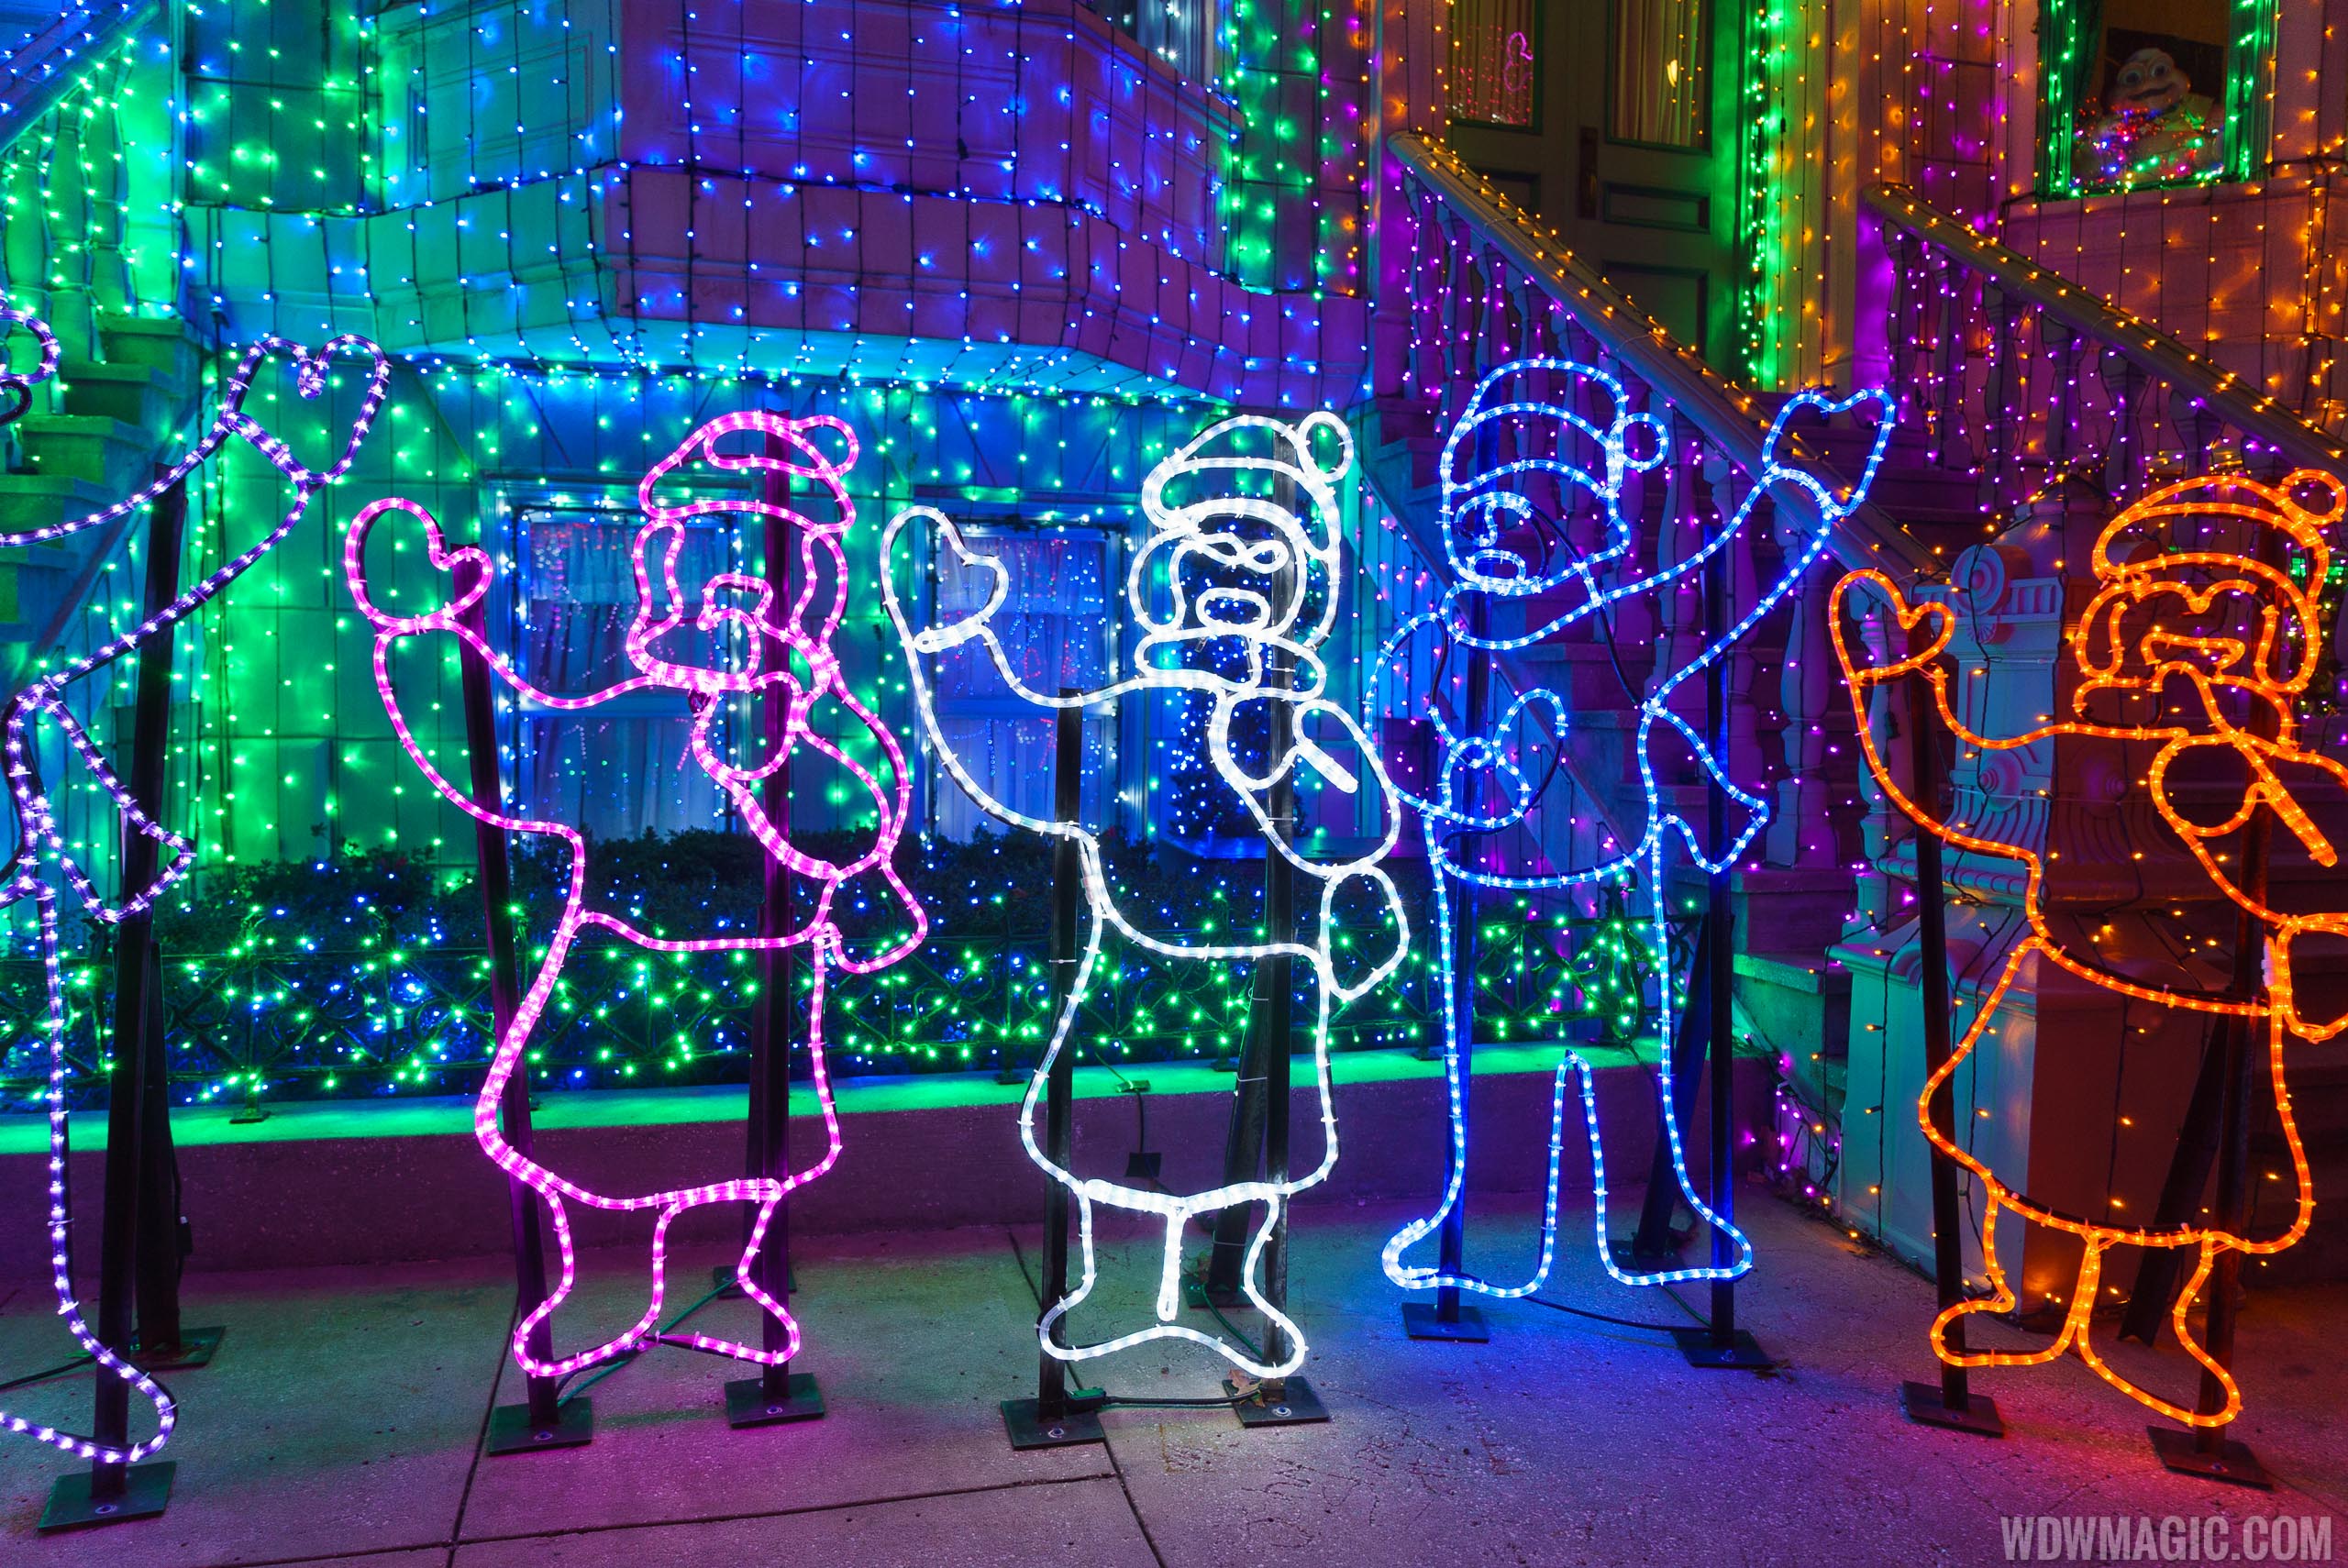 the osbourne family spectacle of dancing lights